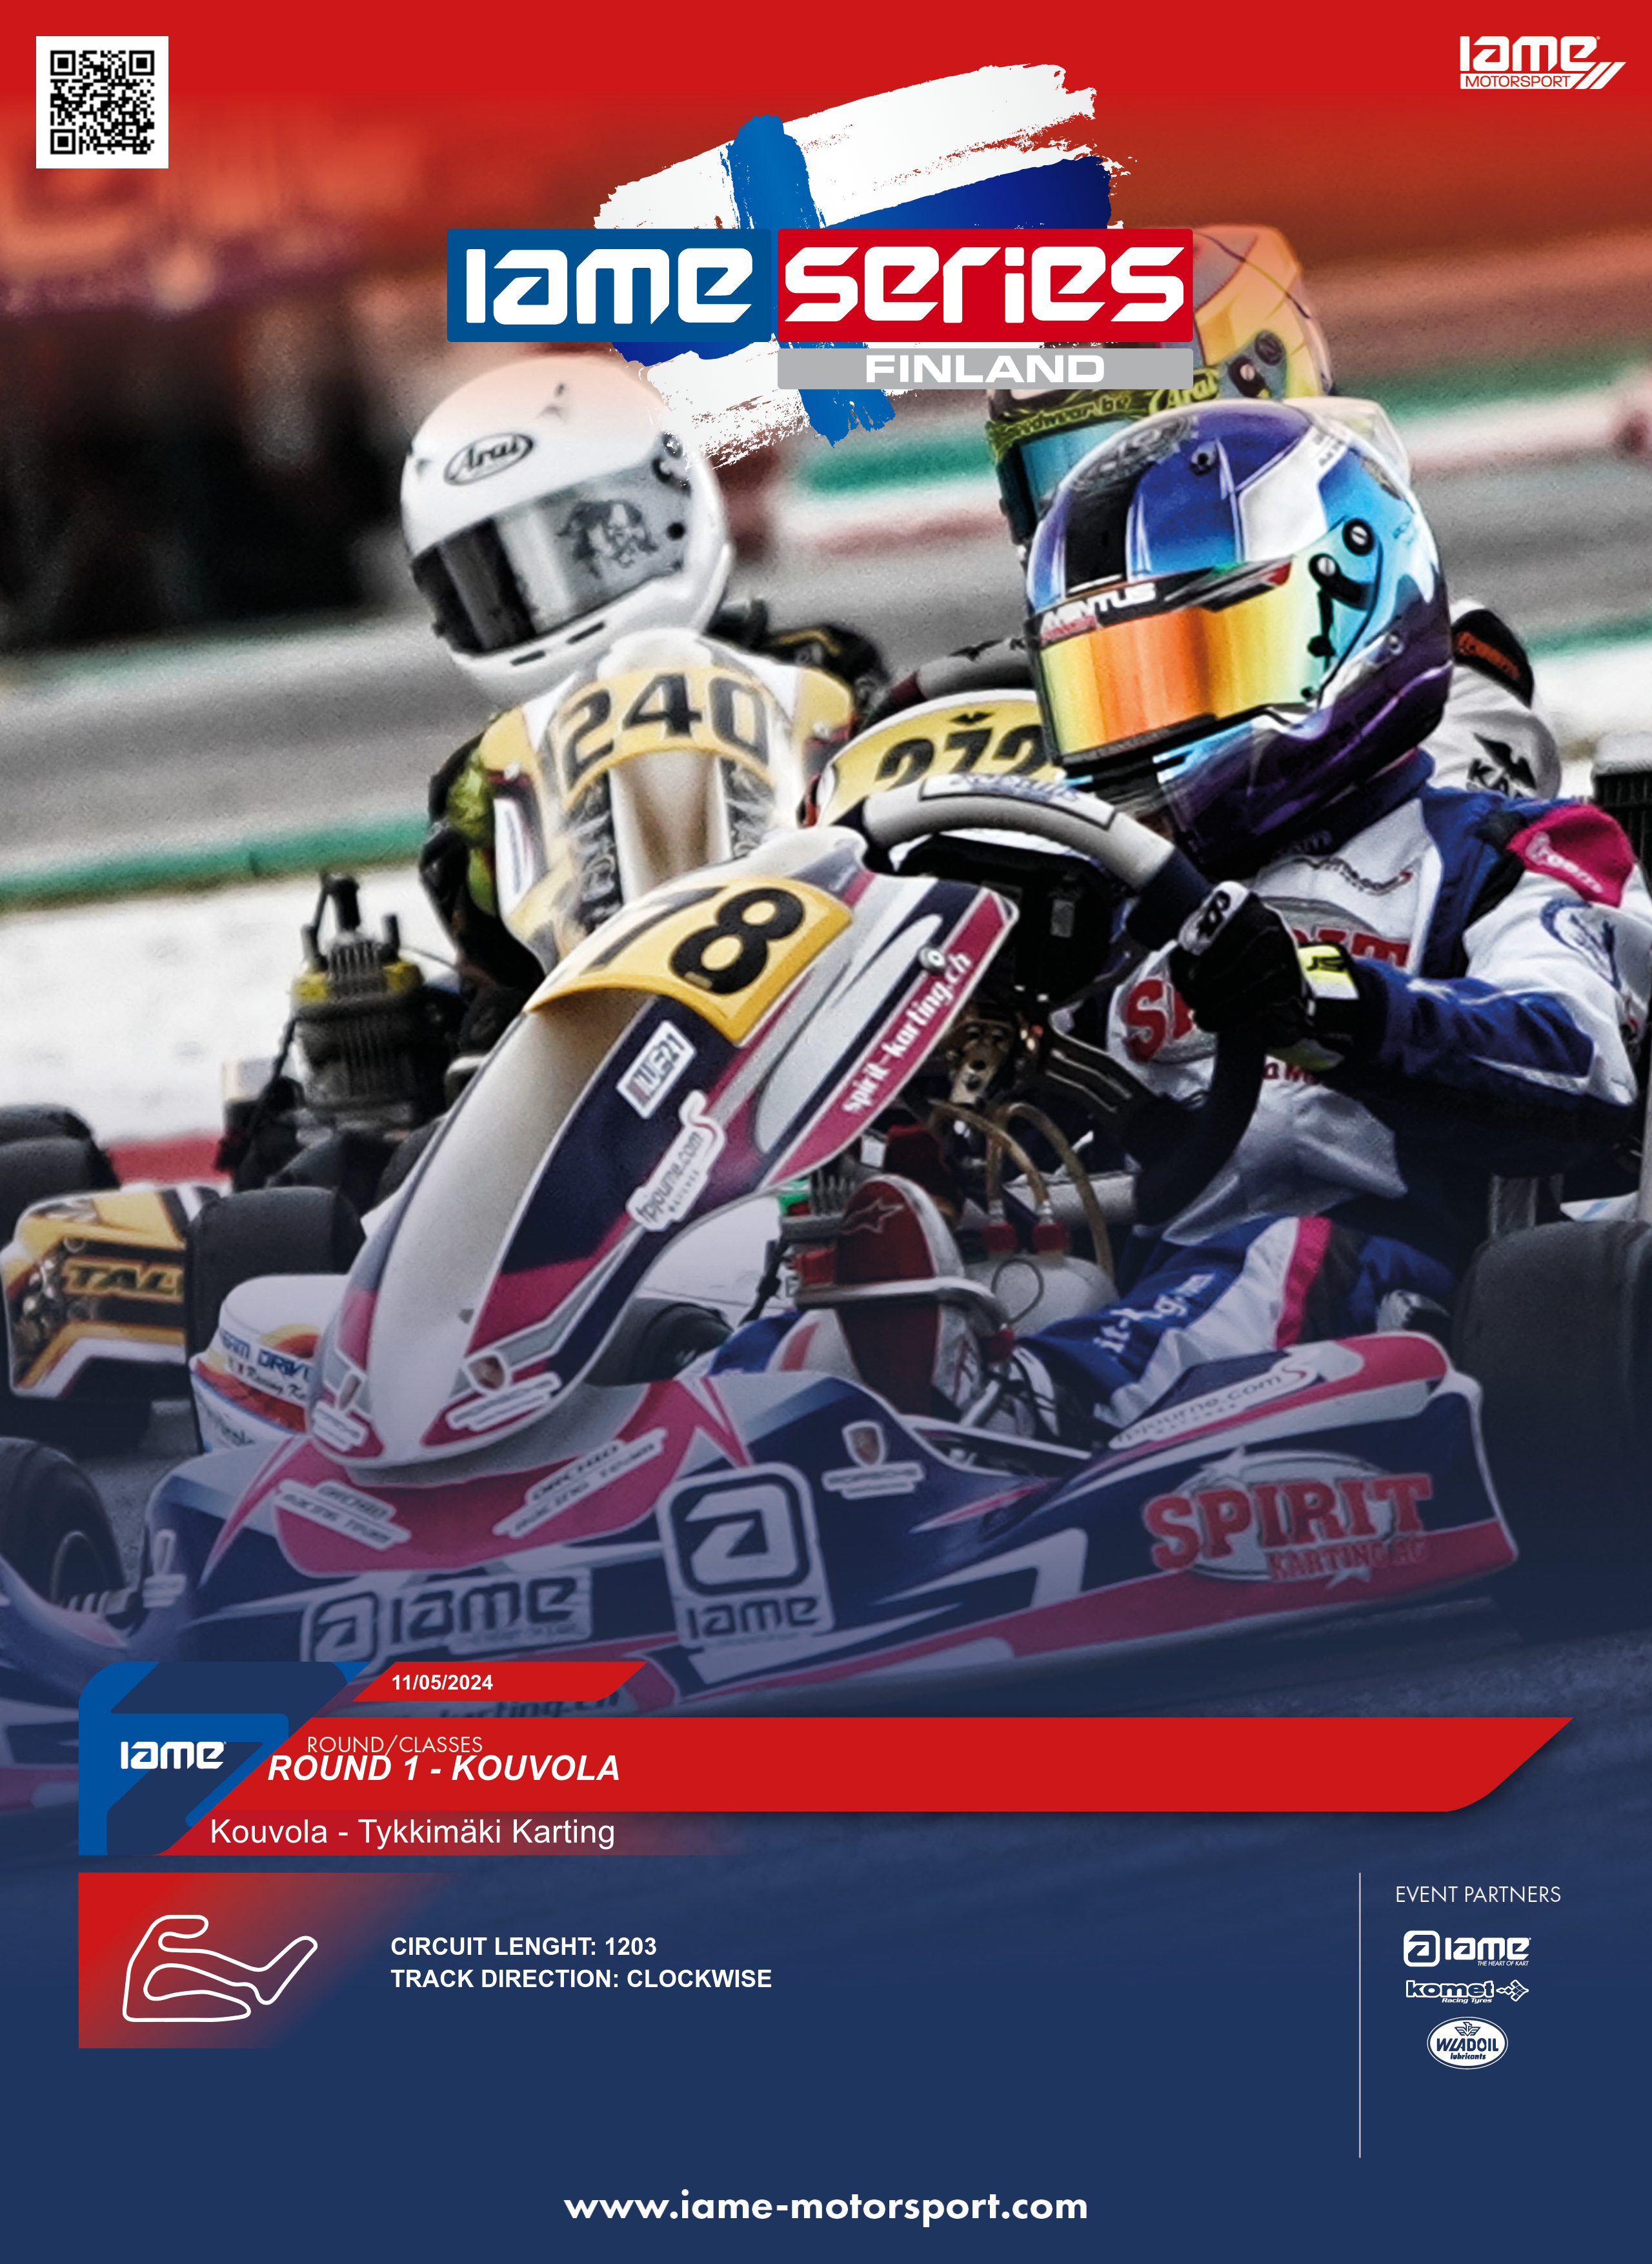 Get Ready for an Unforgettable Karting Experience: Iame Series Finland - Round 1 in Kouvola!